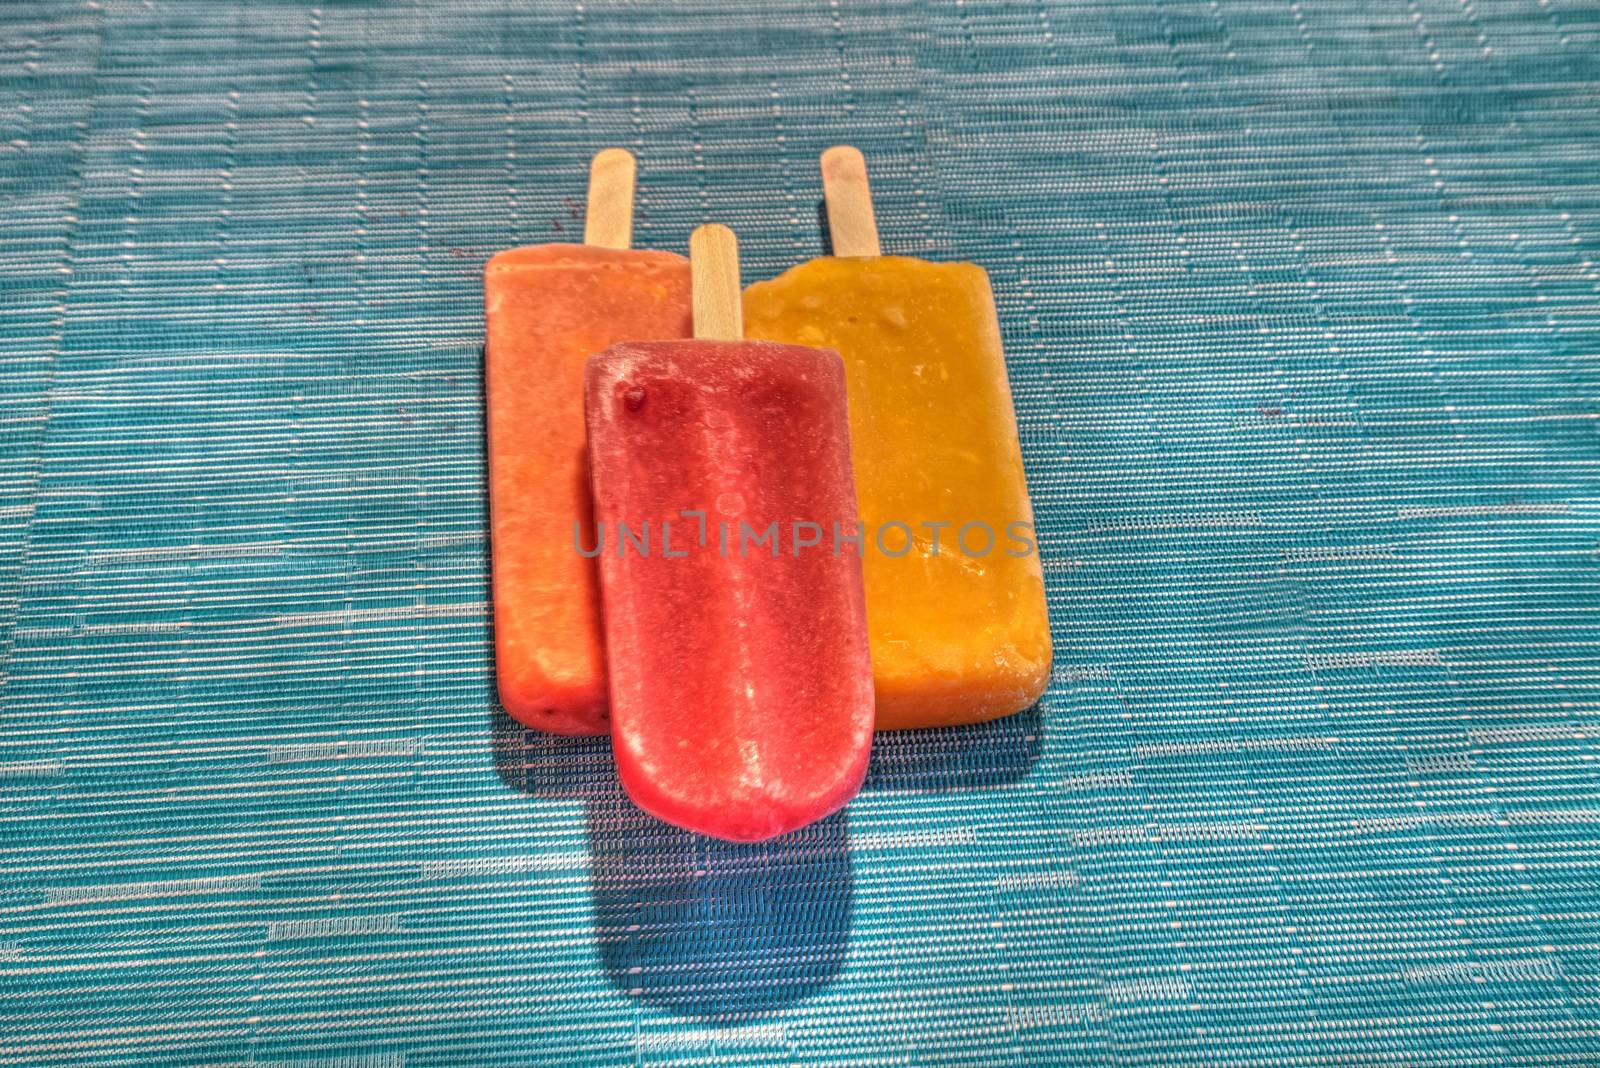 Fruit popsicles on an aqua blue background in summer by steffstarr